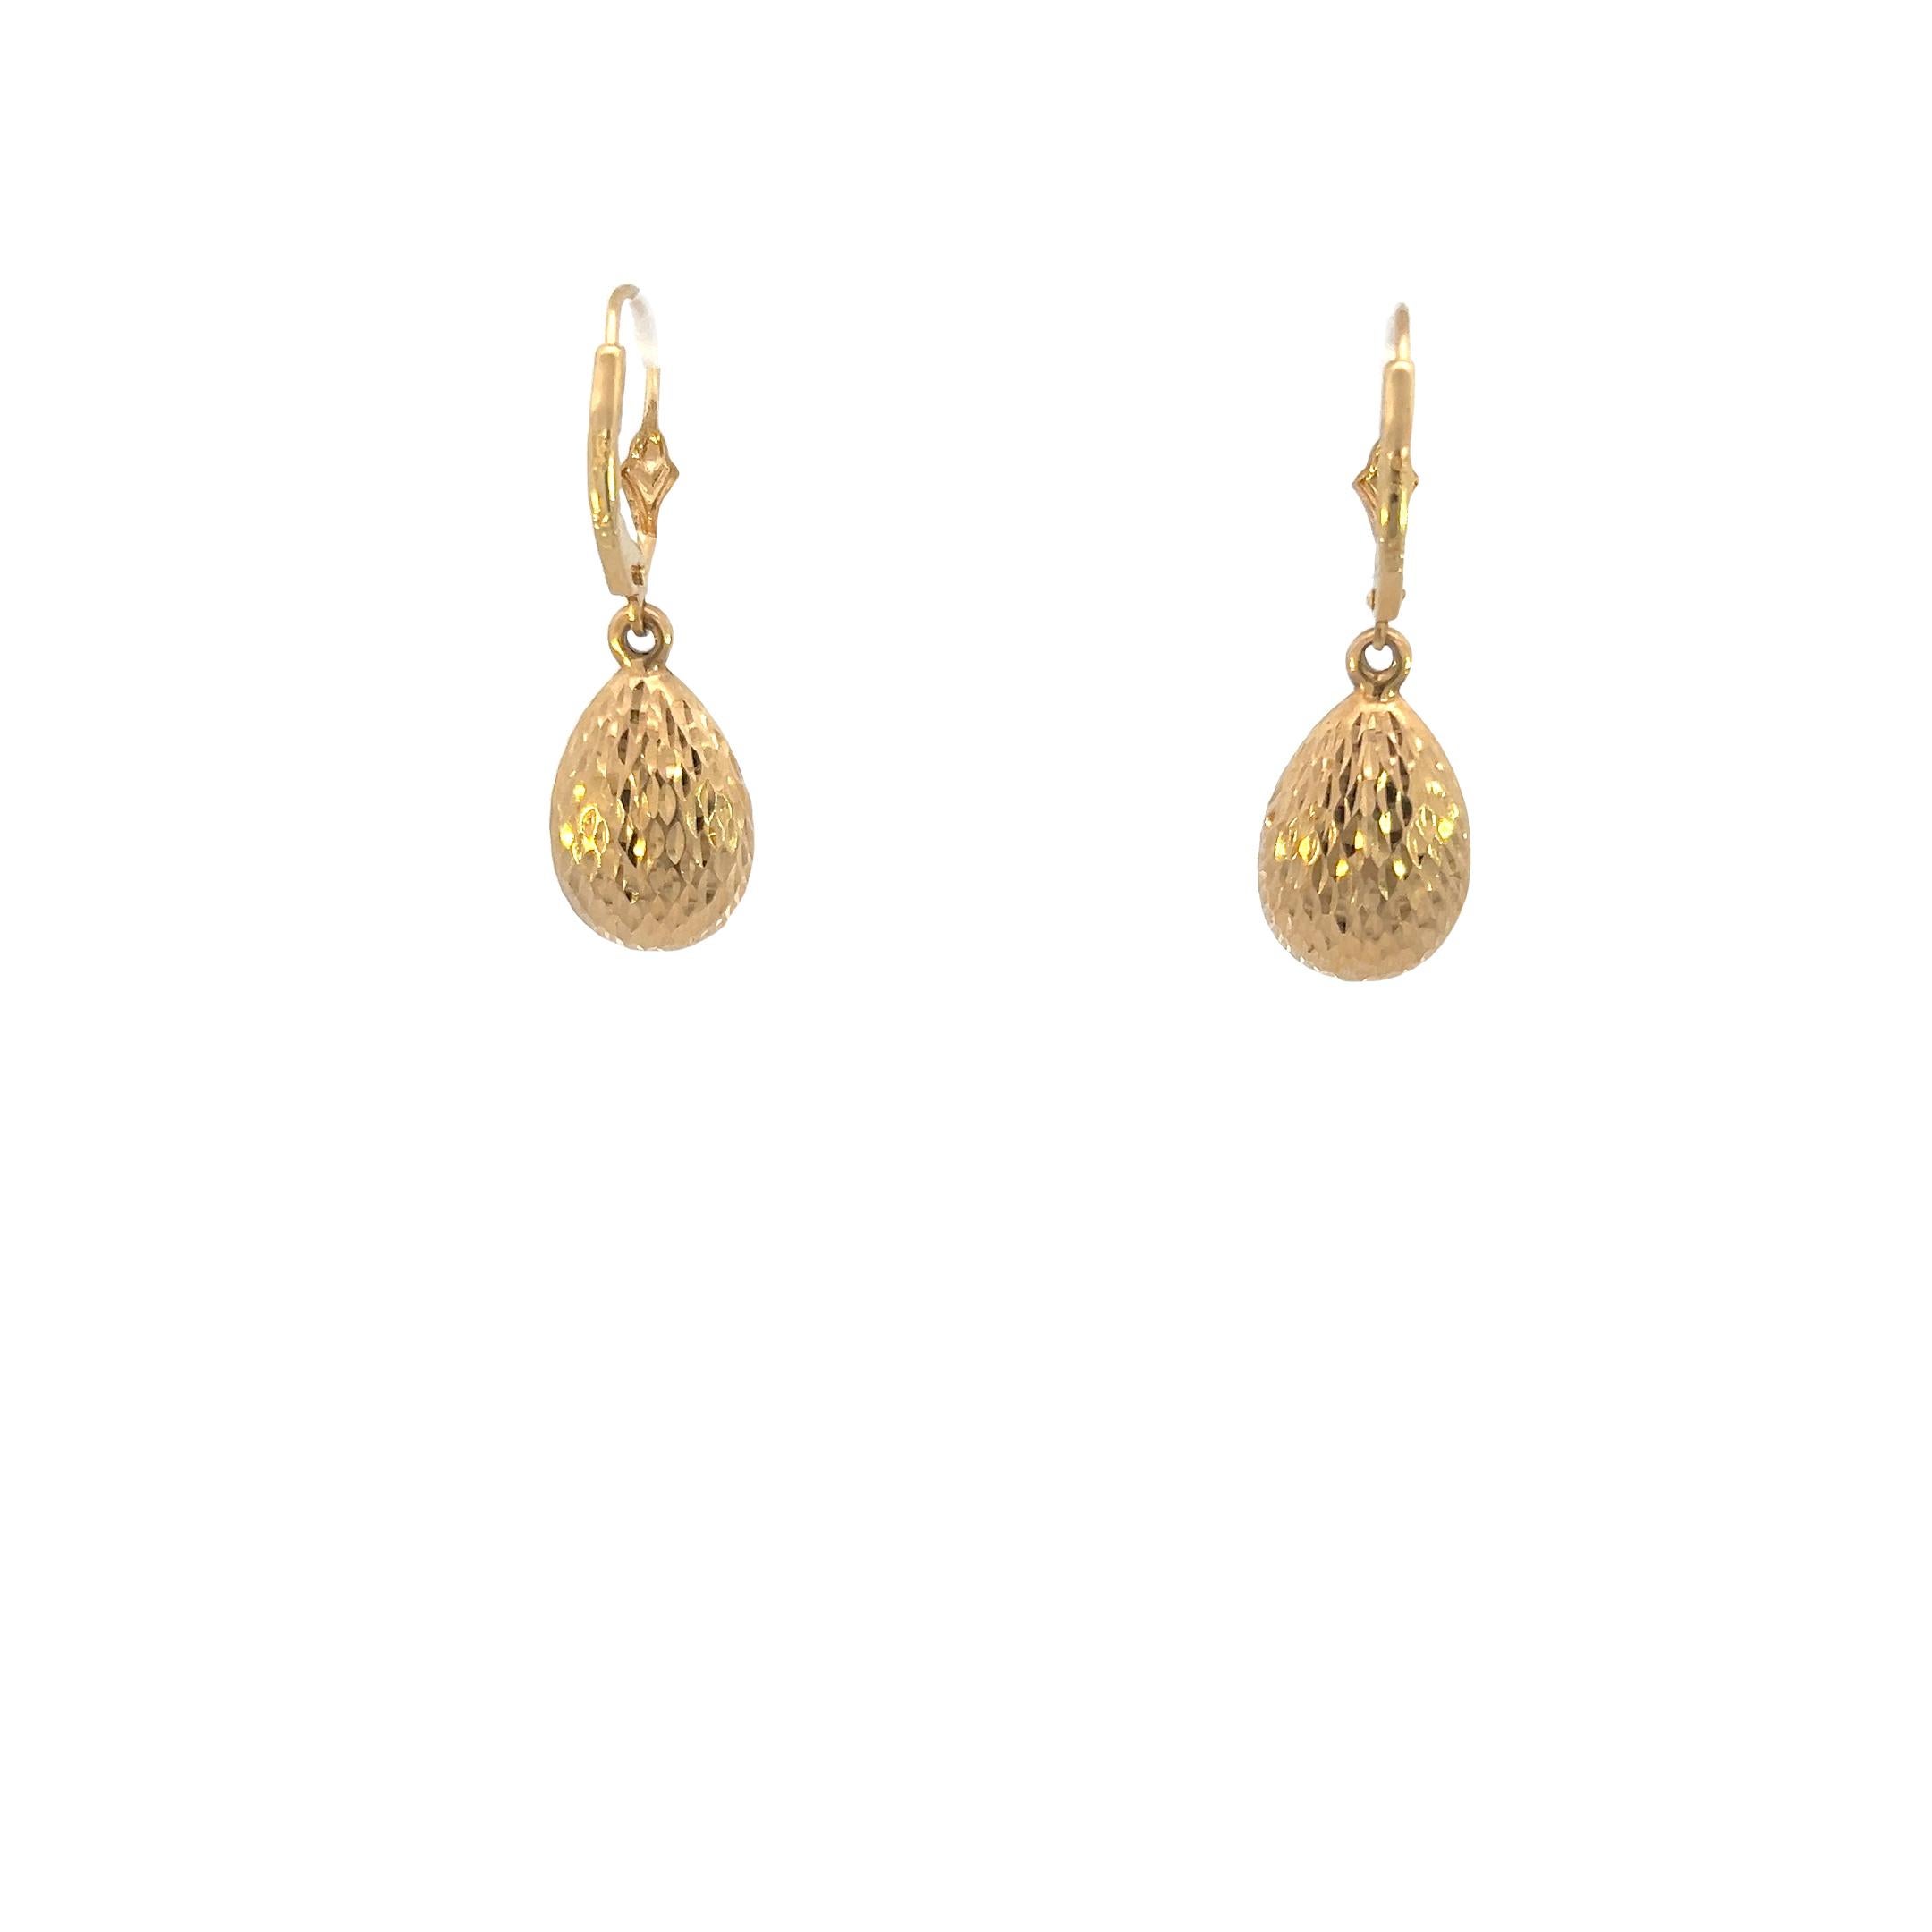 14k yellow gold earrings weighing 1.93 grams:

Material: The earrings are made of 14-karat yellow gold. The 